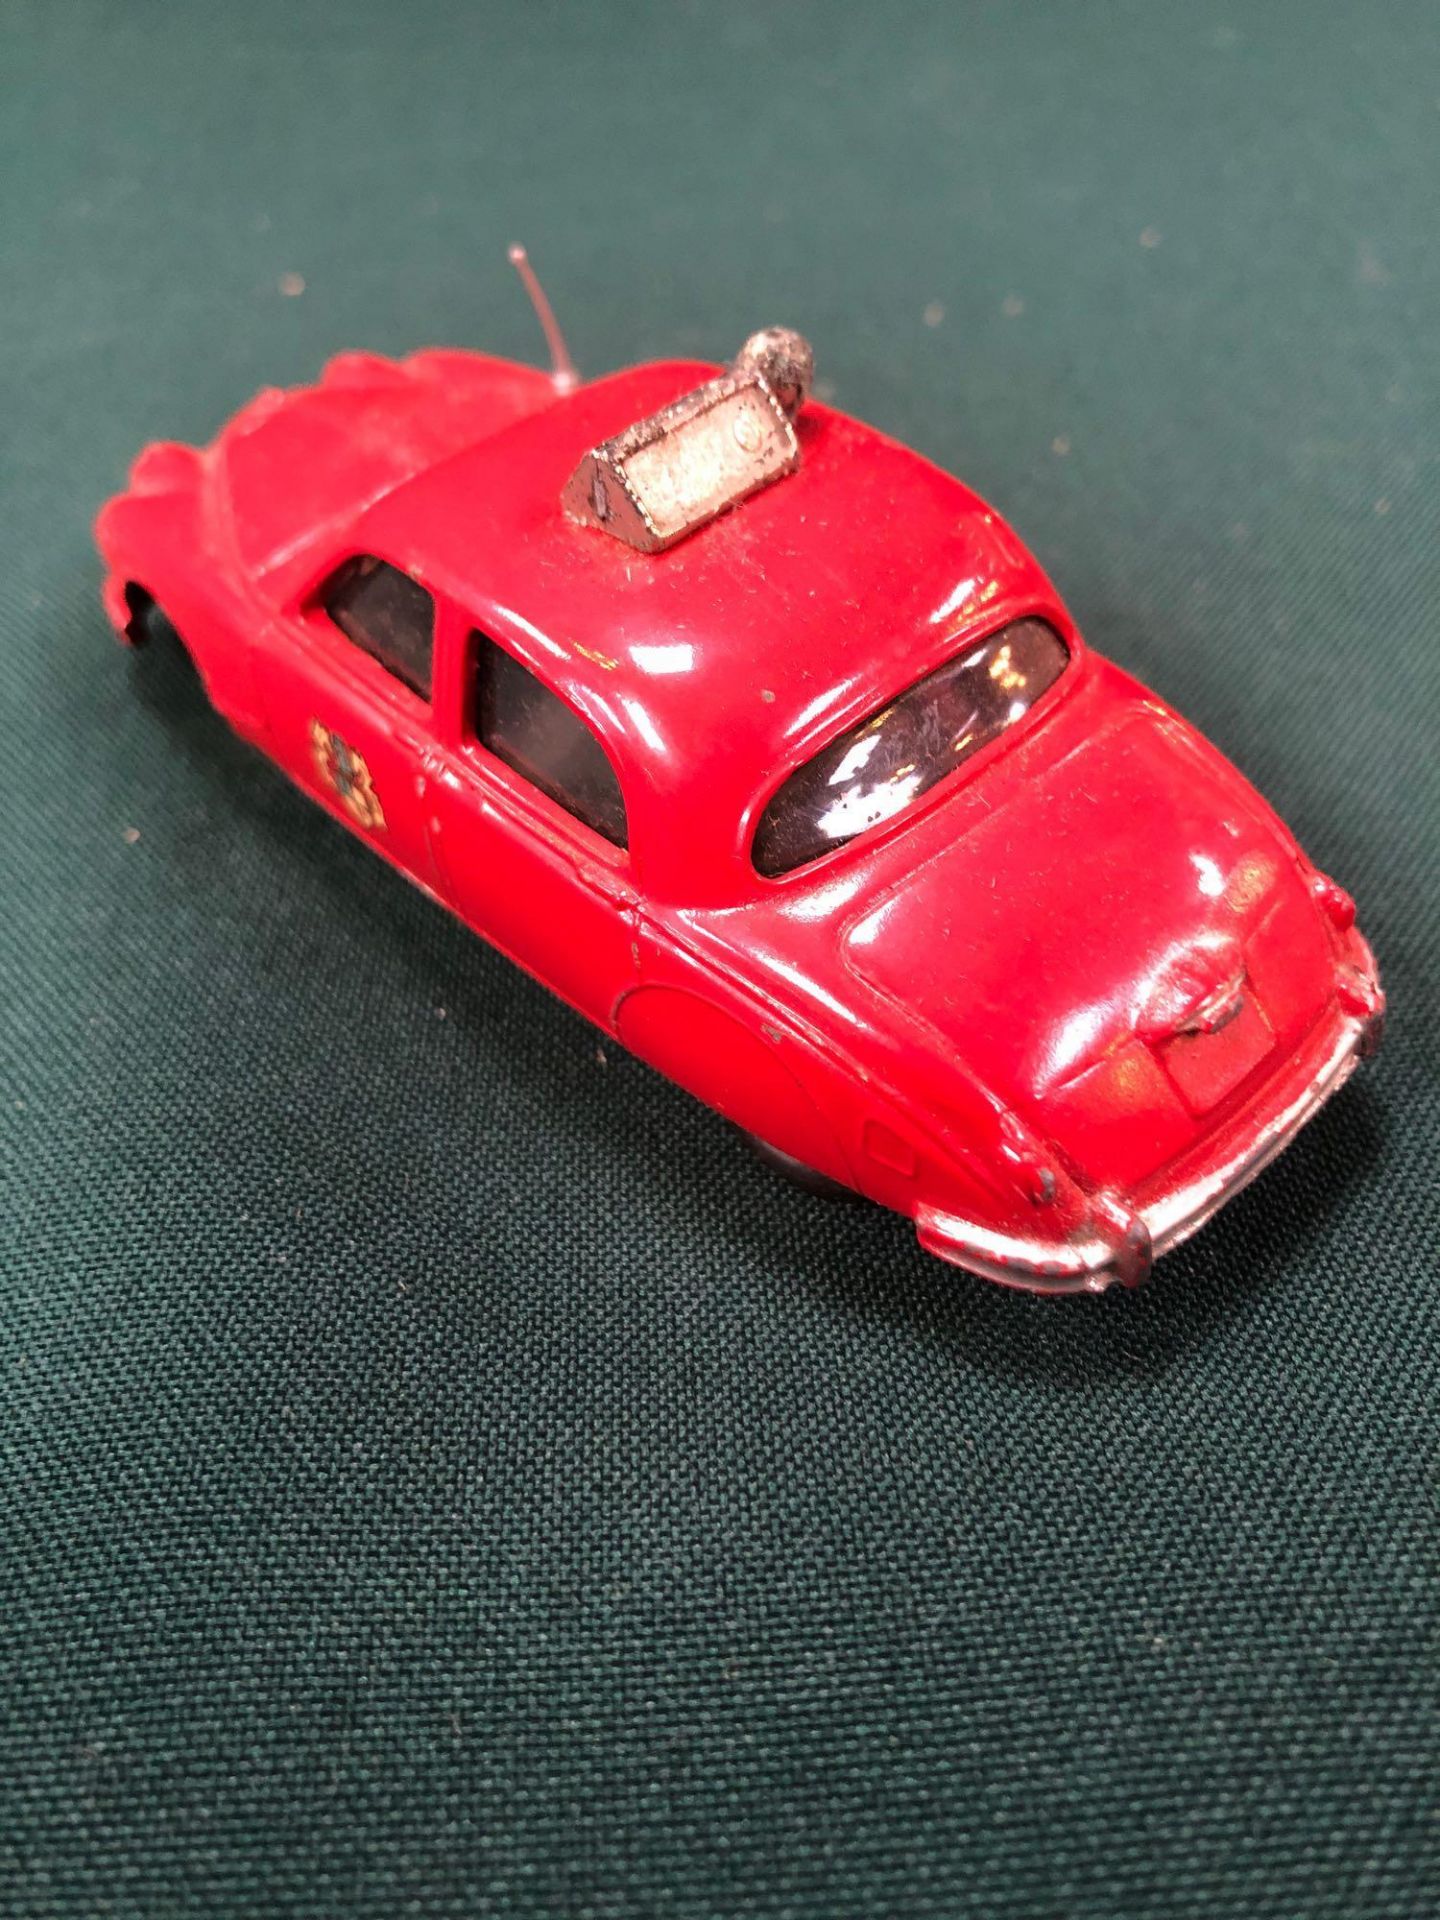 Corgi Toys Diecast #213 24 Jaguar Fire Service Car In A Poor Box With (No End Flaps Or Tabs) - Image 3 of 3